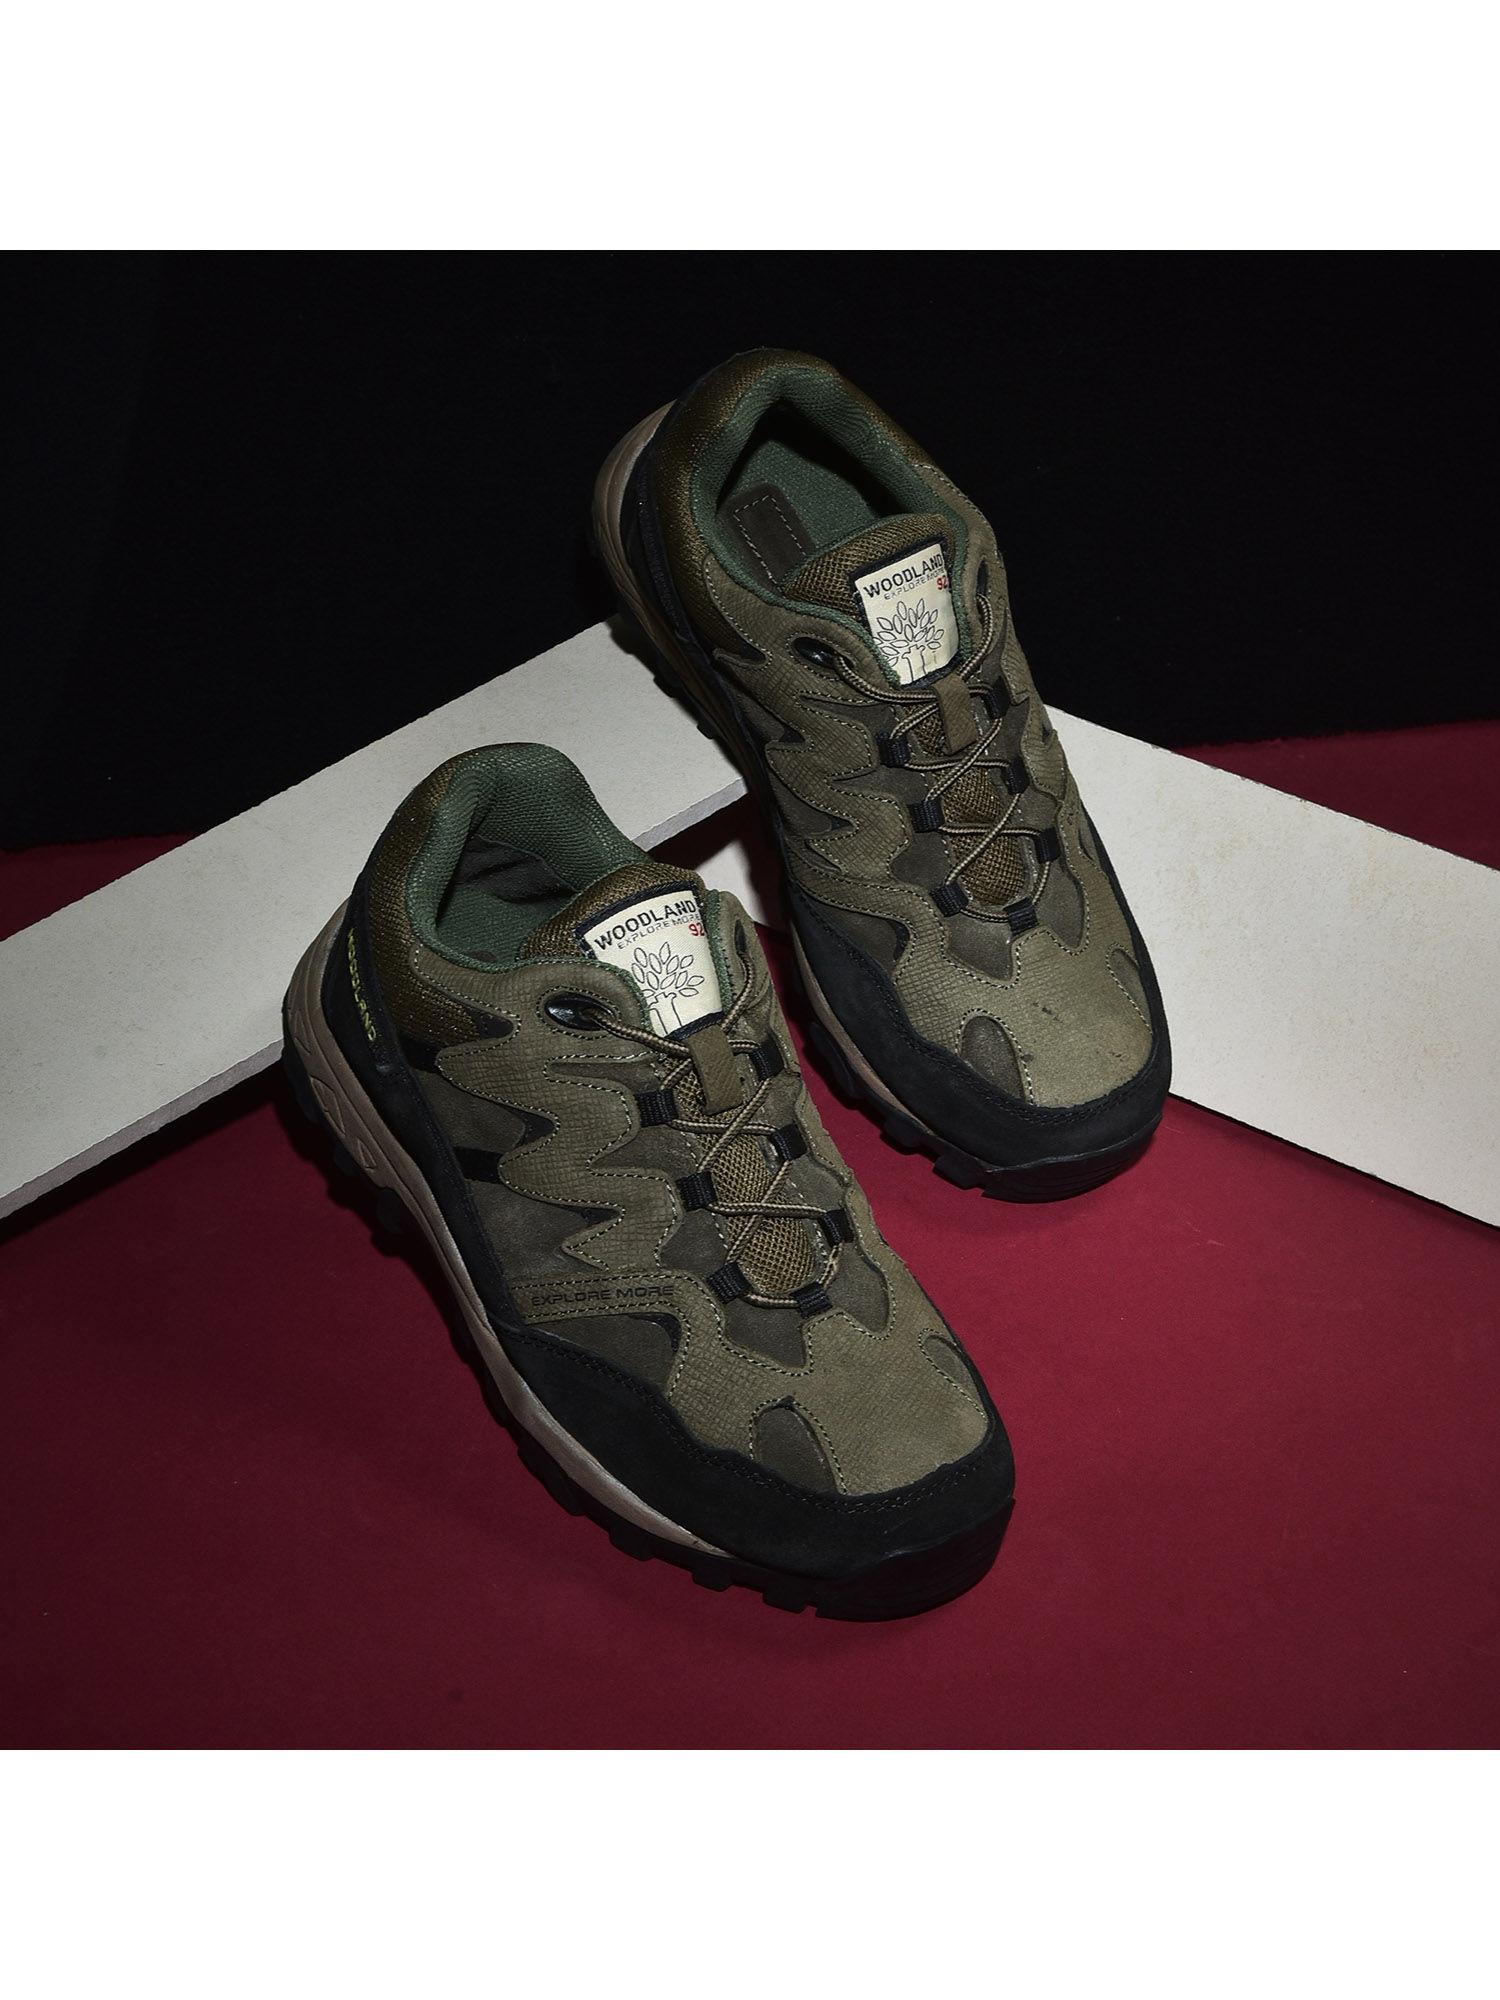 olive green casual trekking shoes for men